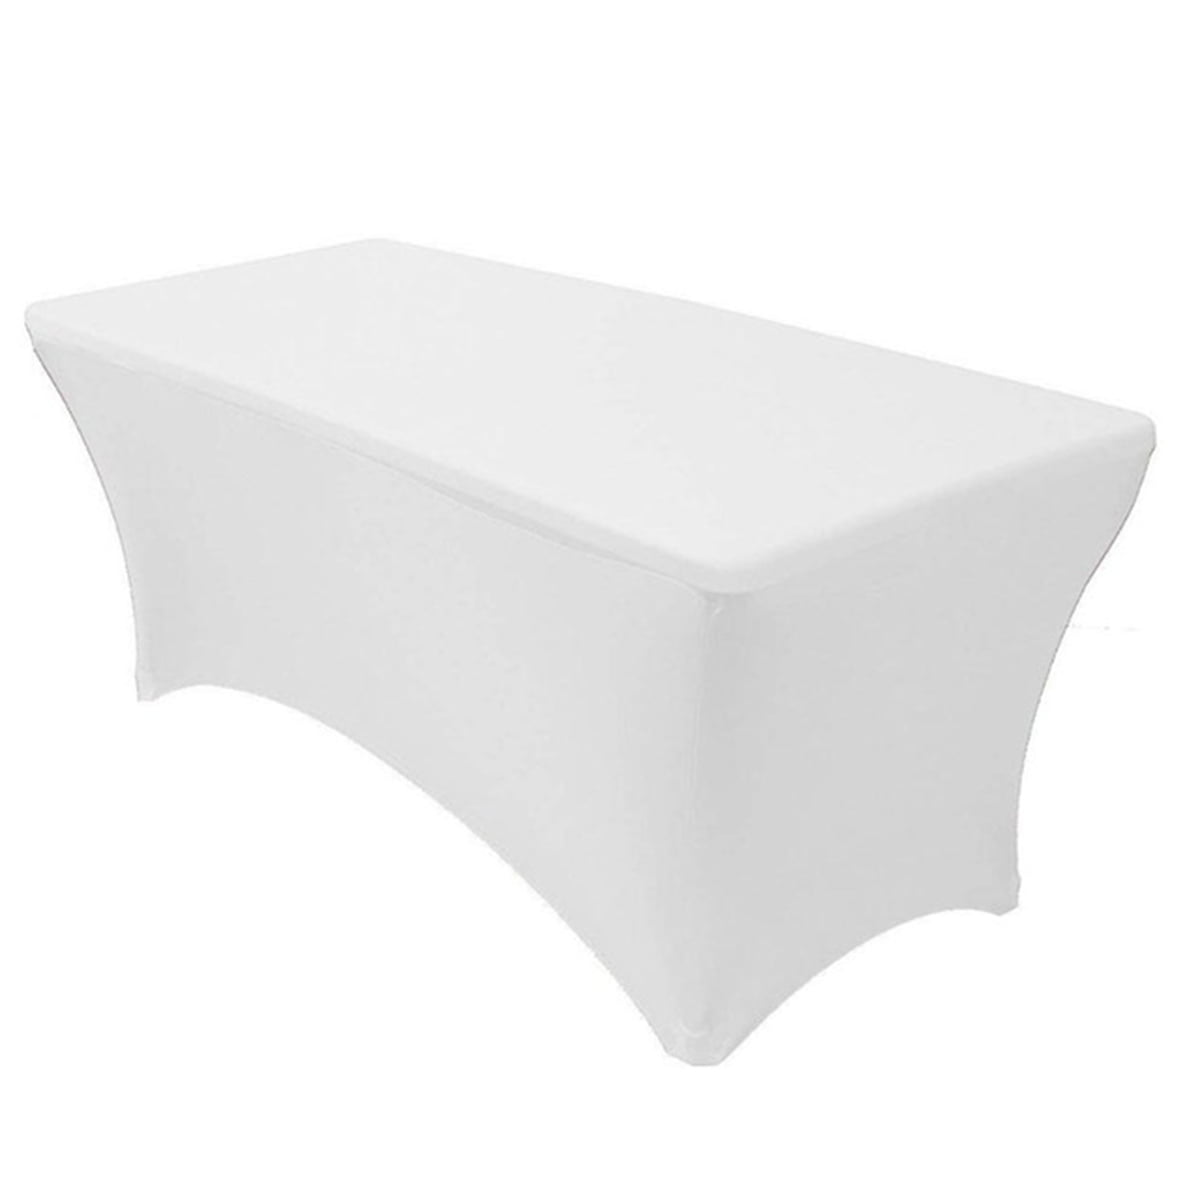 4/6/8ft Rectangular Table Cover Fitted Tablecloth Covers for Wedding Party Event 